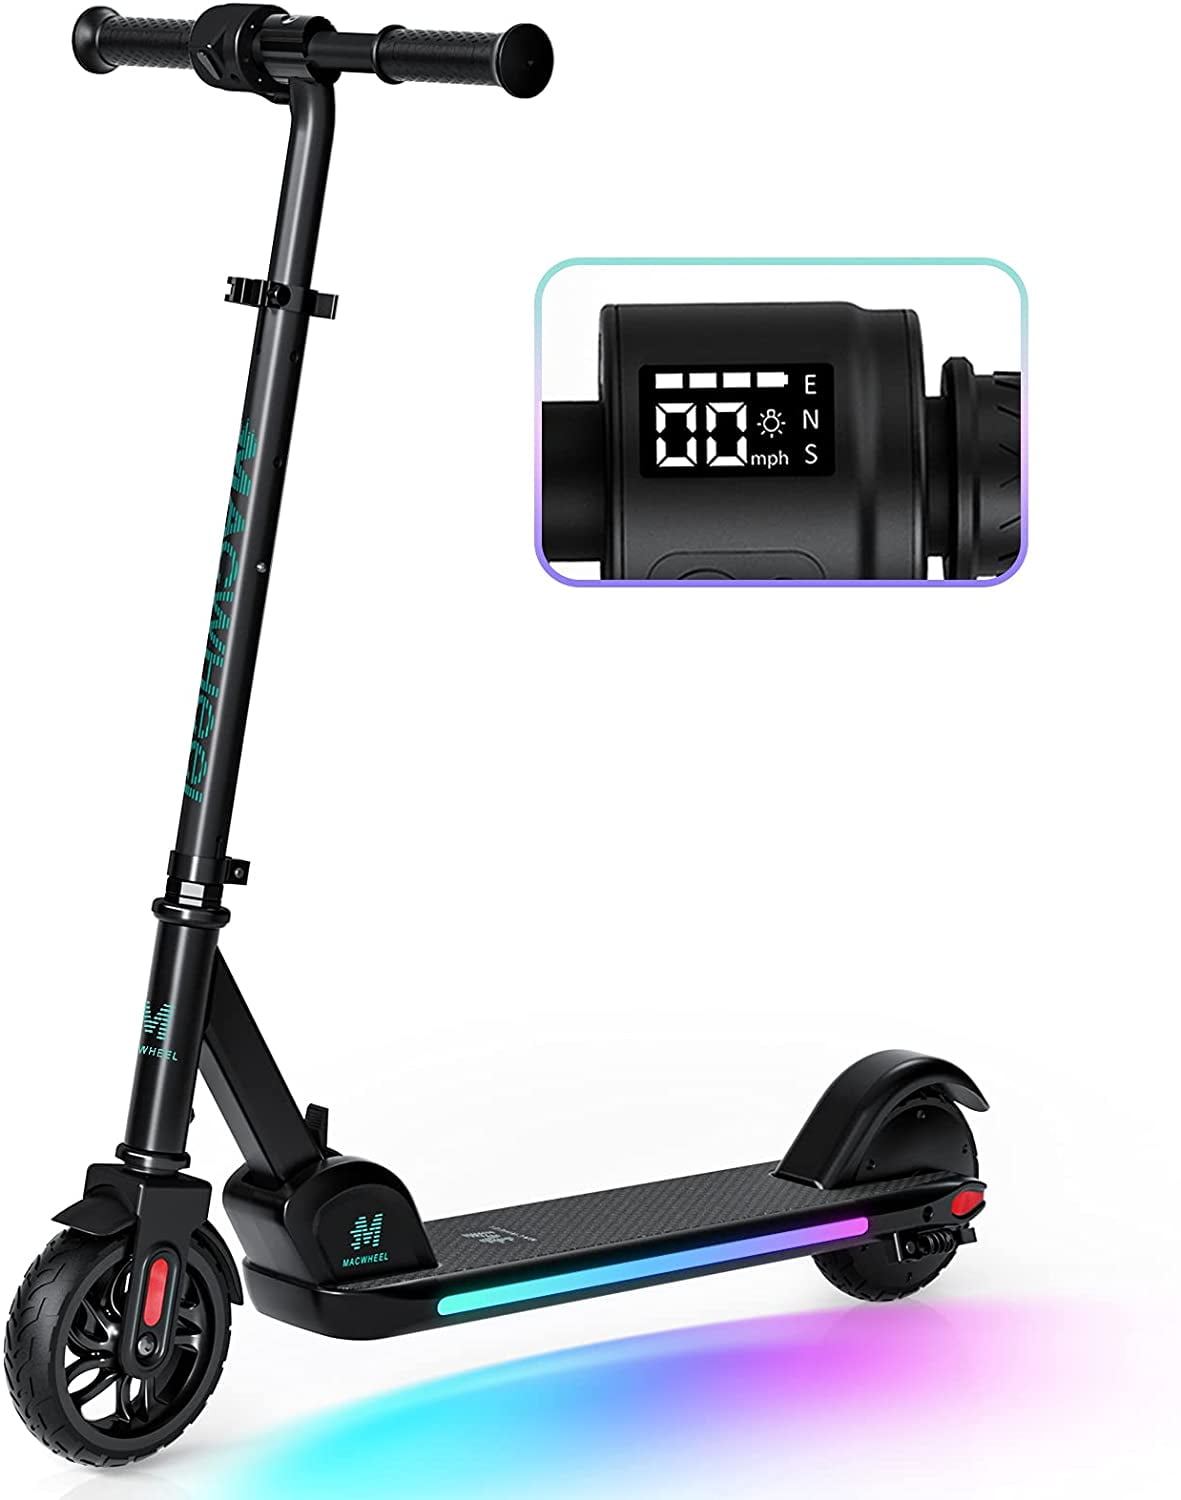 Macwheel Electric Scooter, Electric Scooter for Kids Age 8+, Colorful